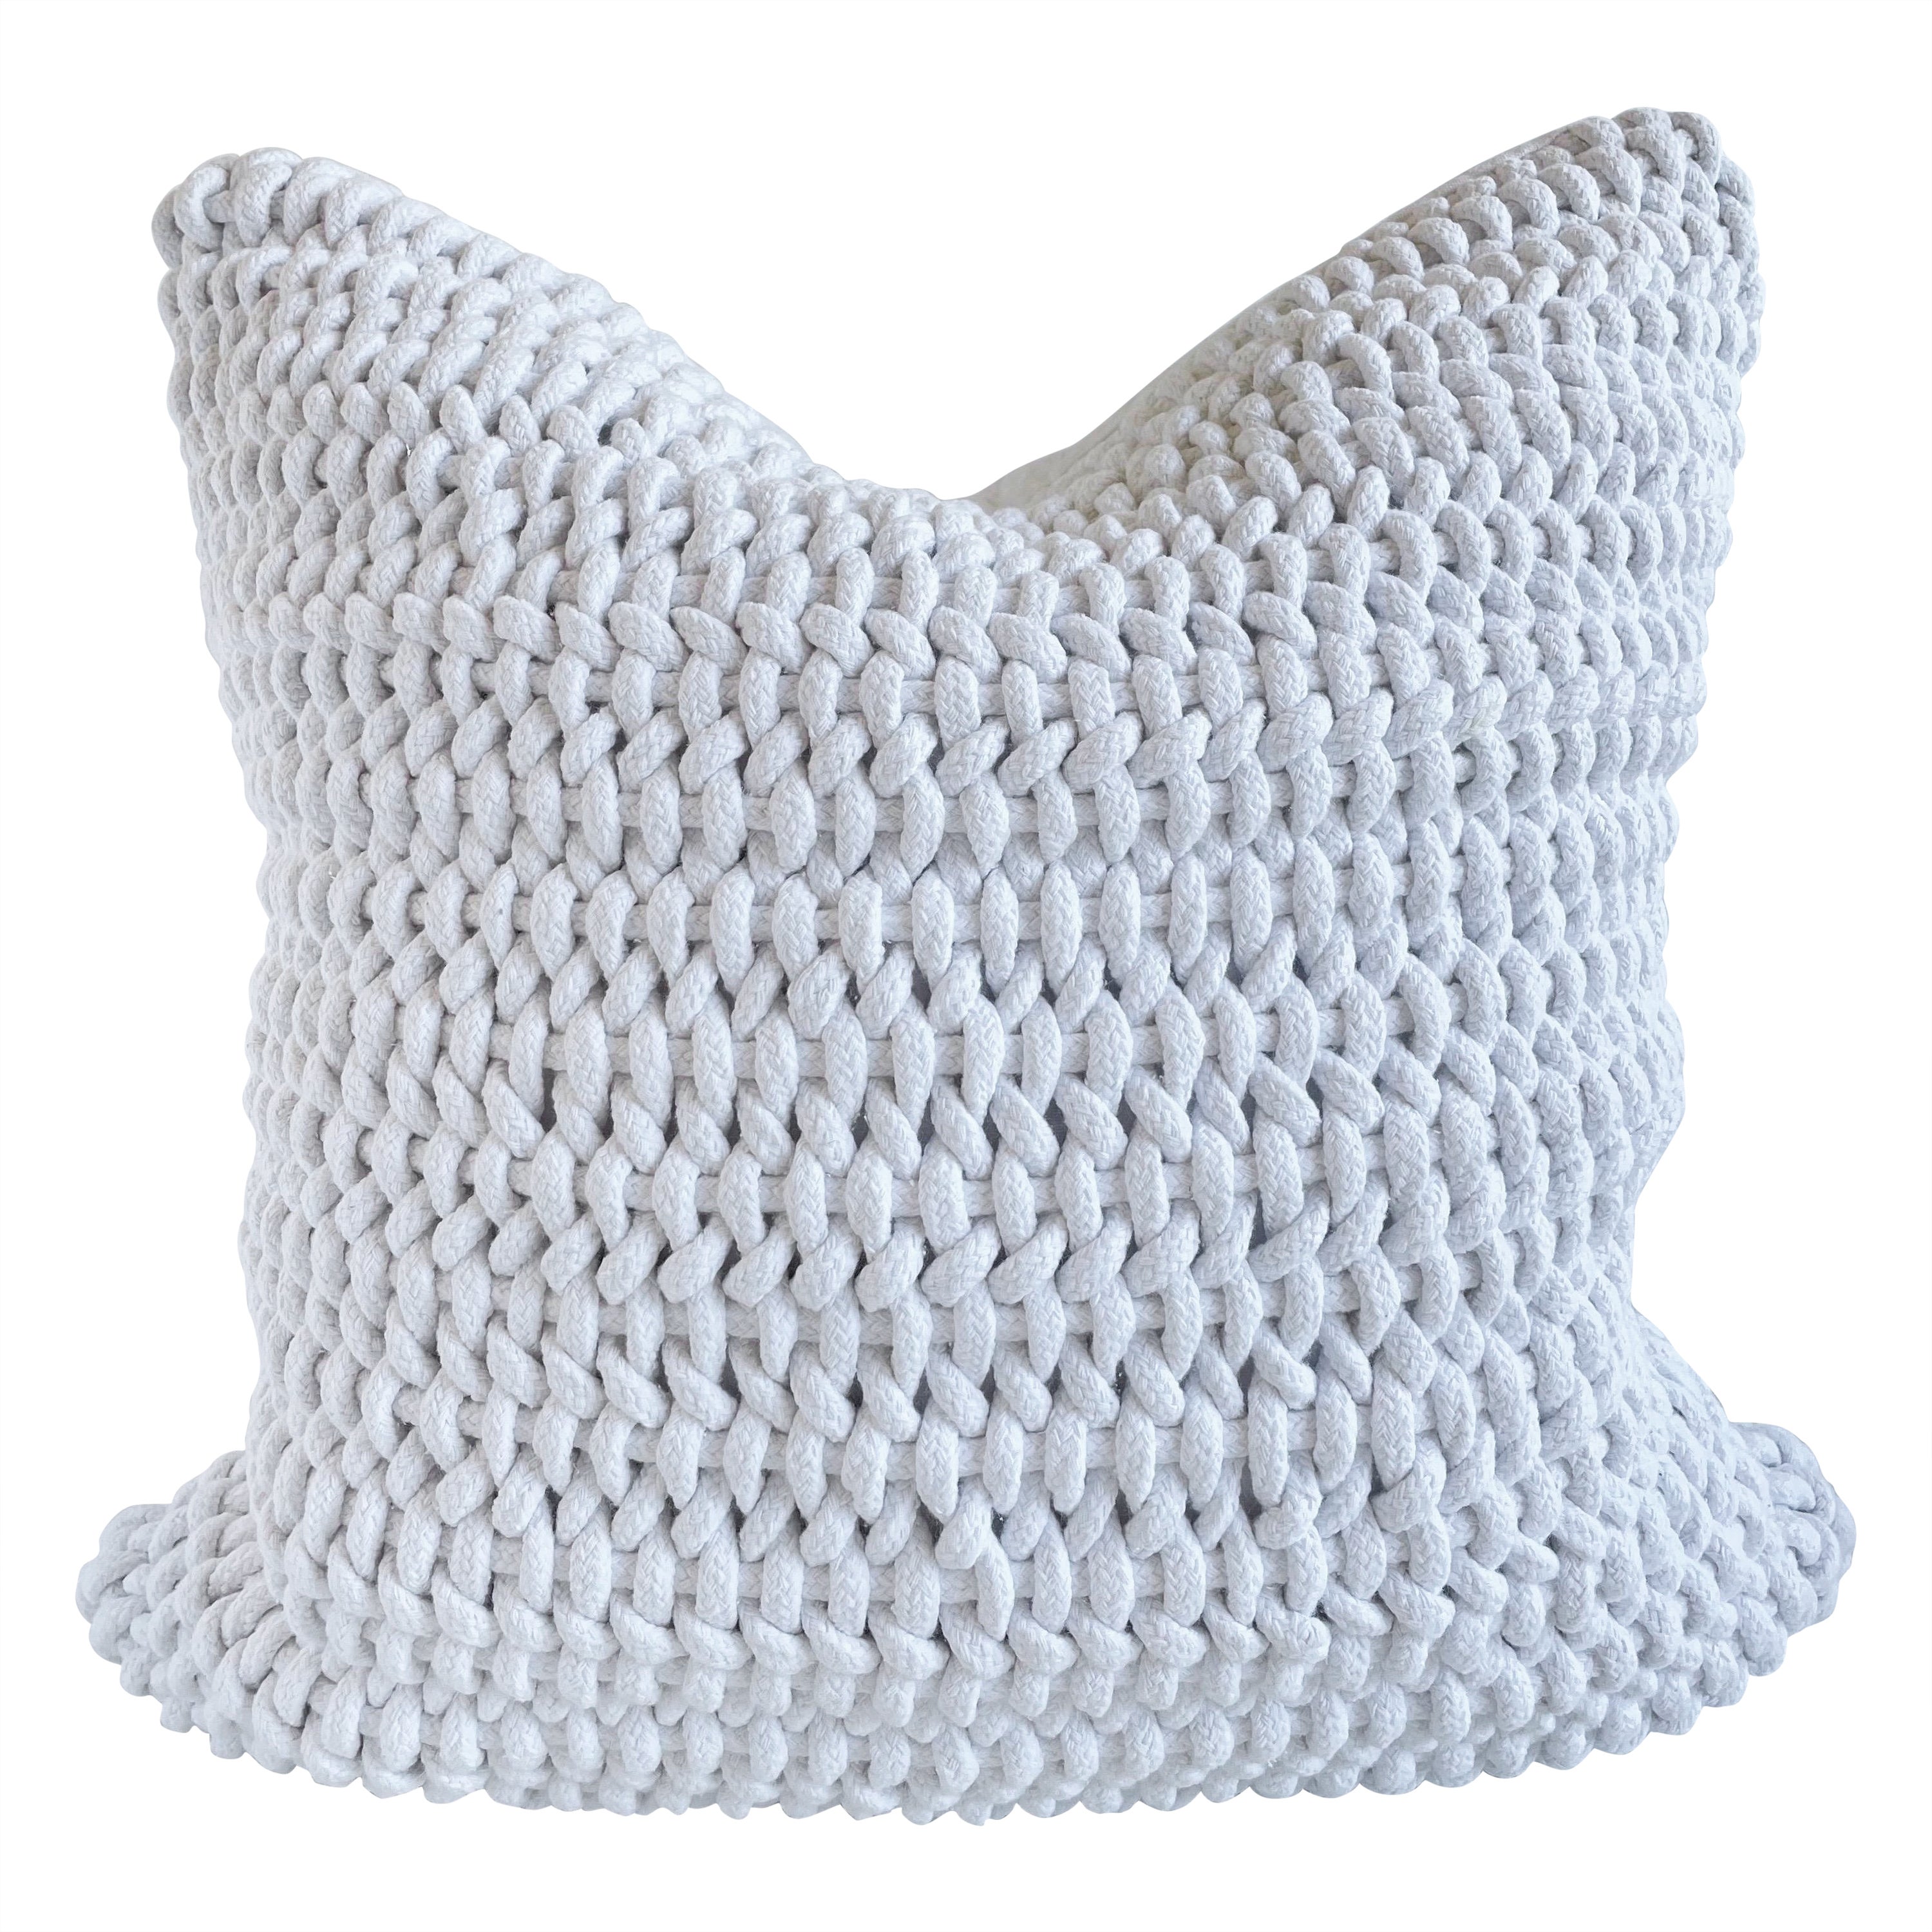 Woven Rope Cotton and Linen Pillow Cover